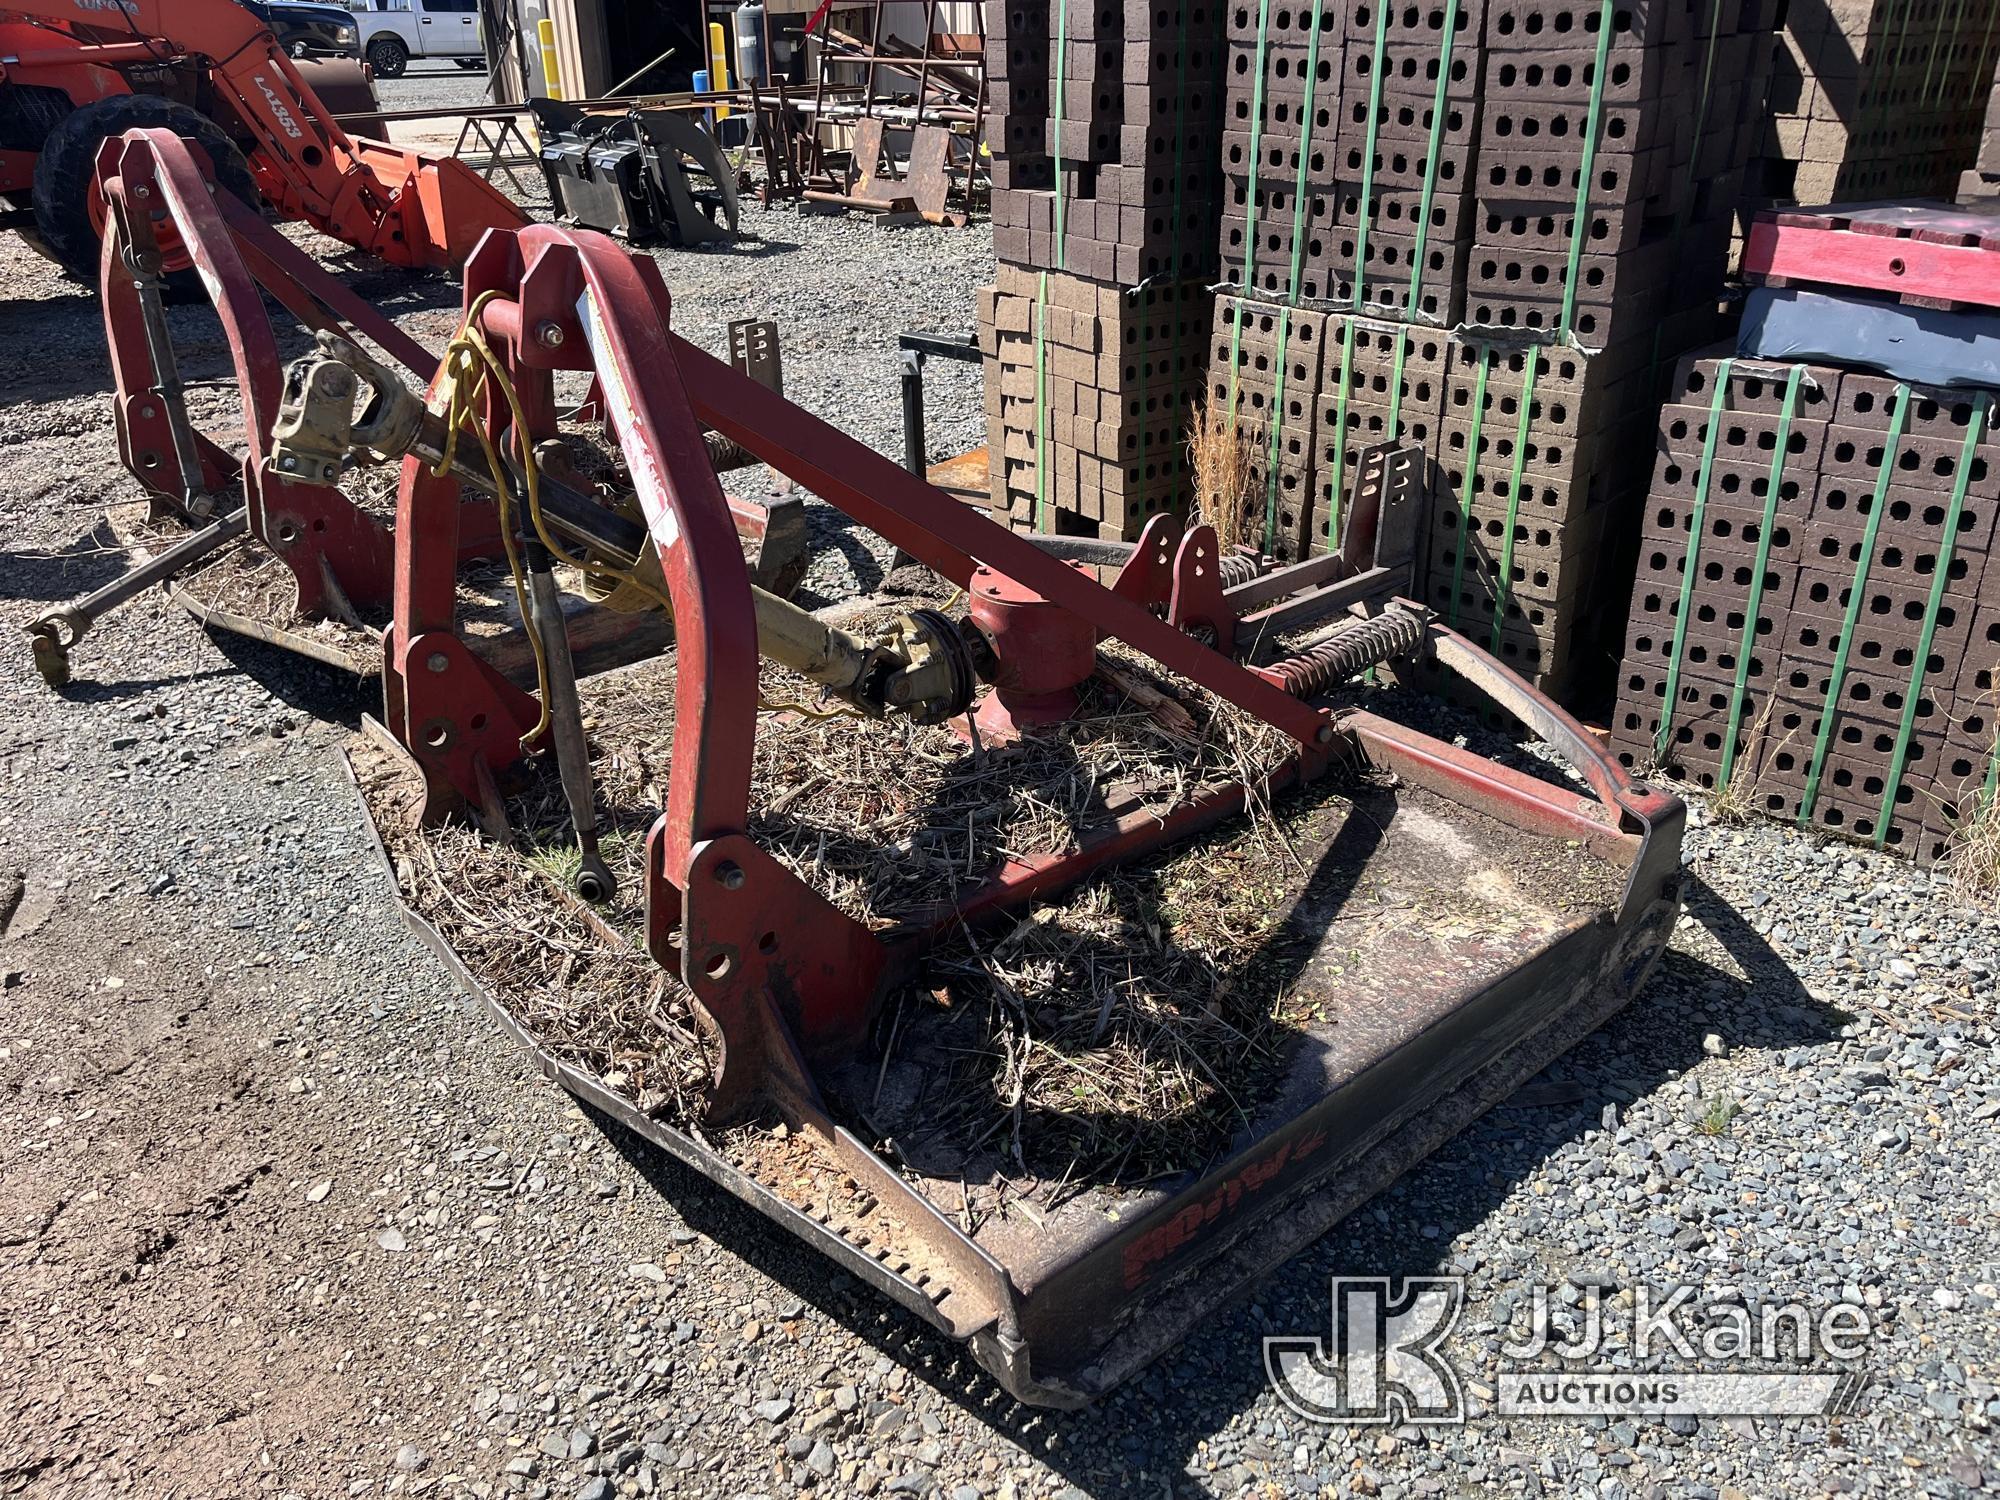 (Homer, LA) Brown Brush Cutter (Operates) (Missing Serial Plate) NOTE: This unit is being sold AS IS